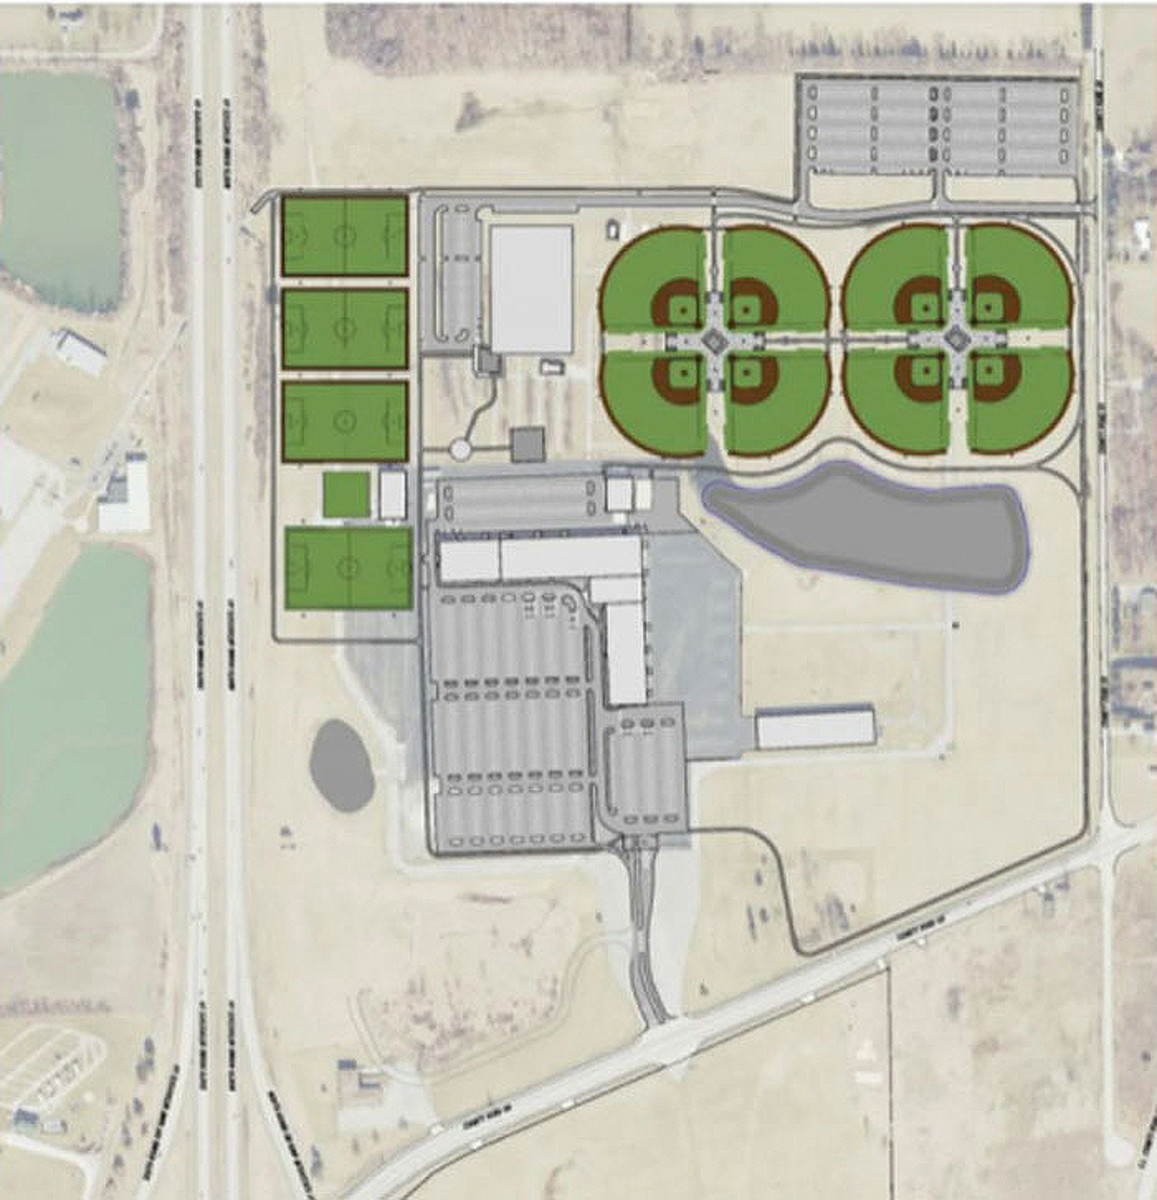 Plans for youth sports complex